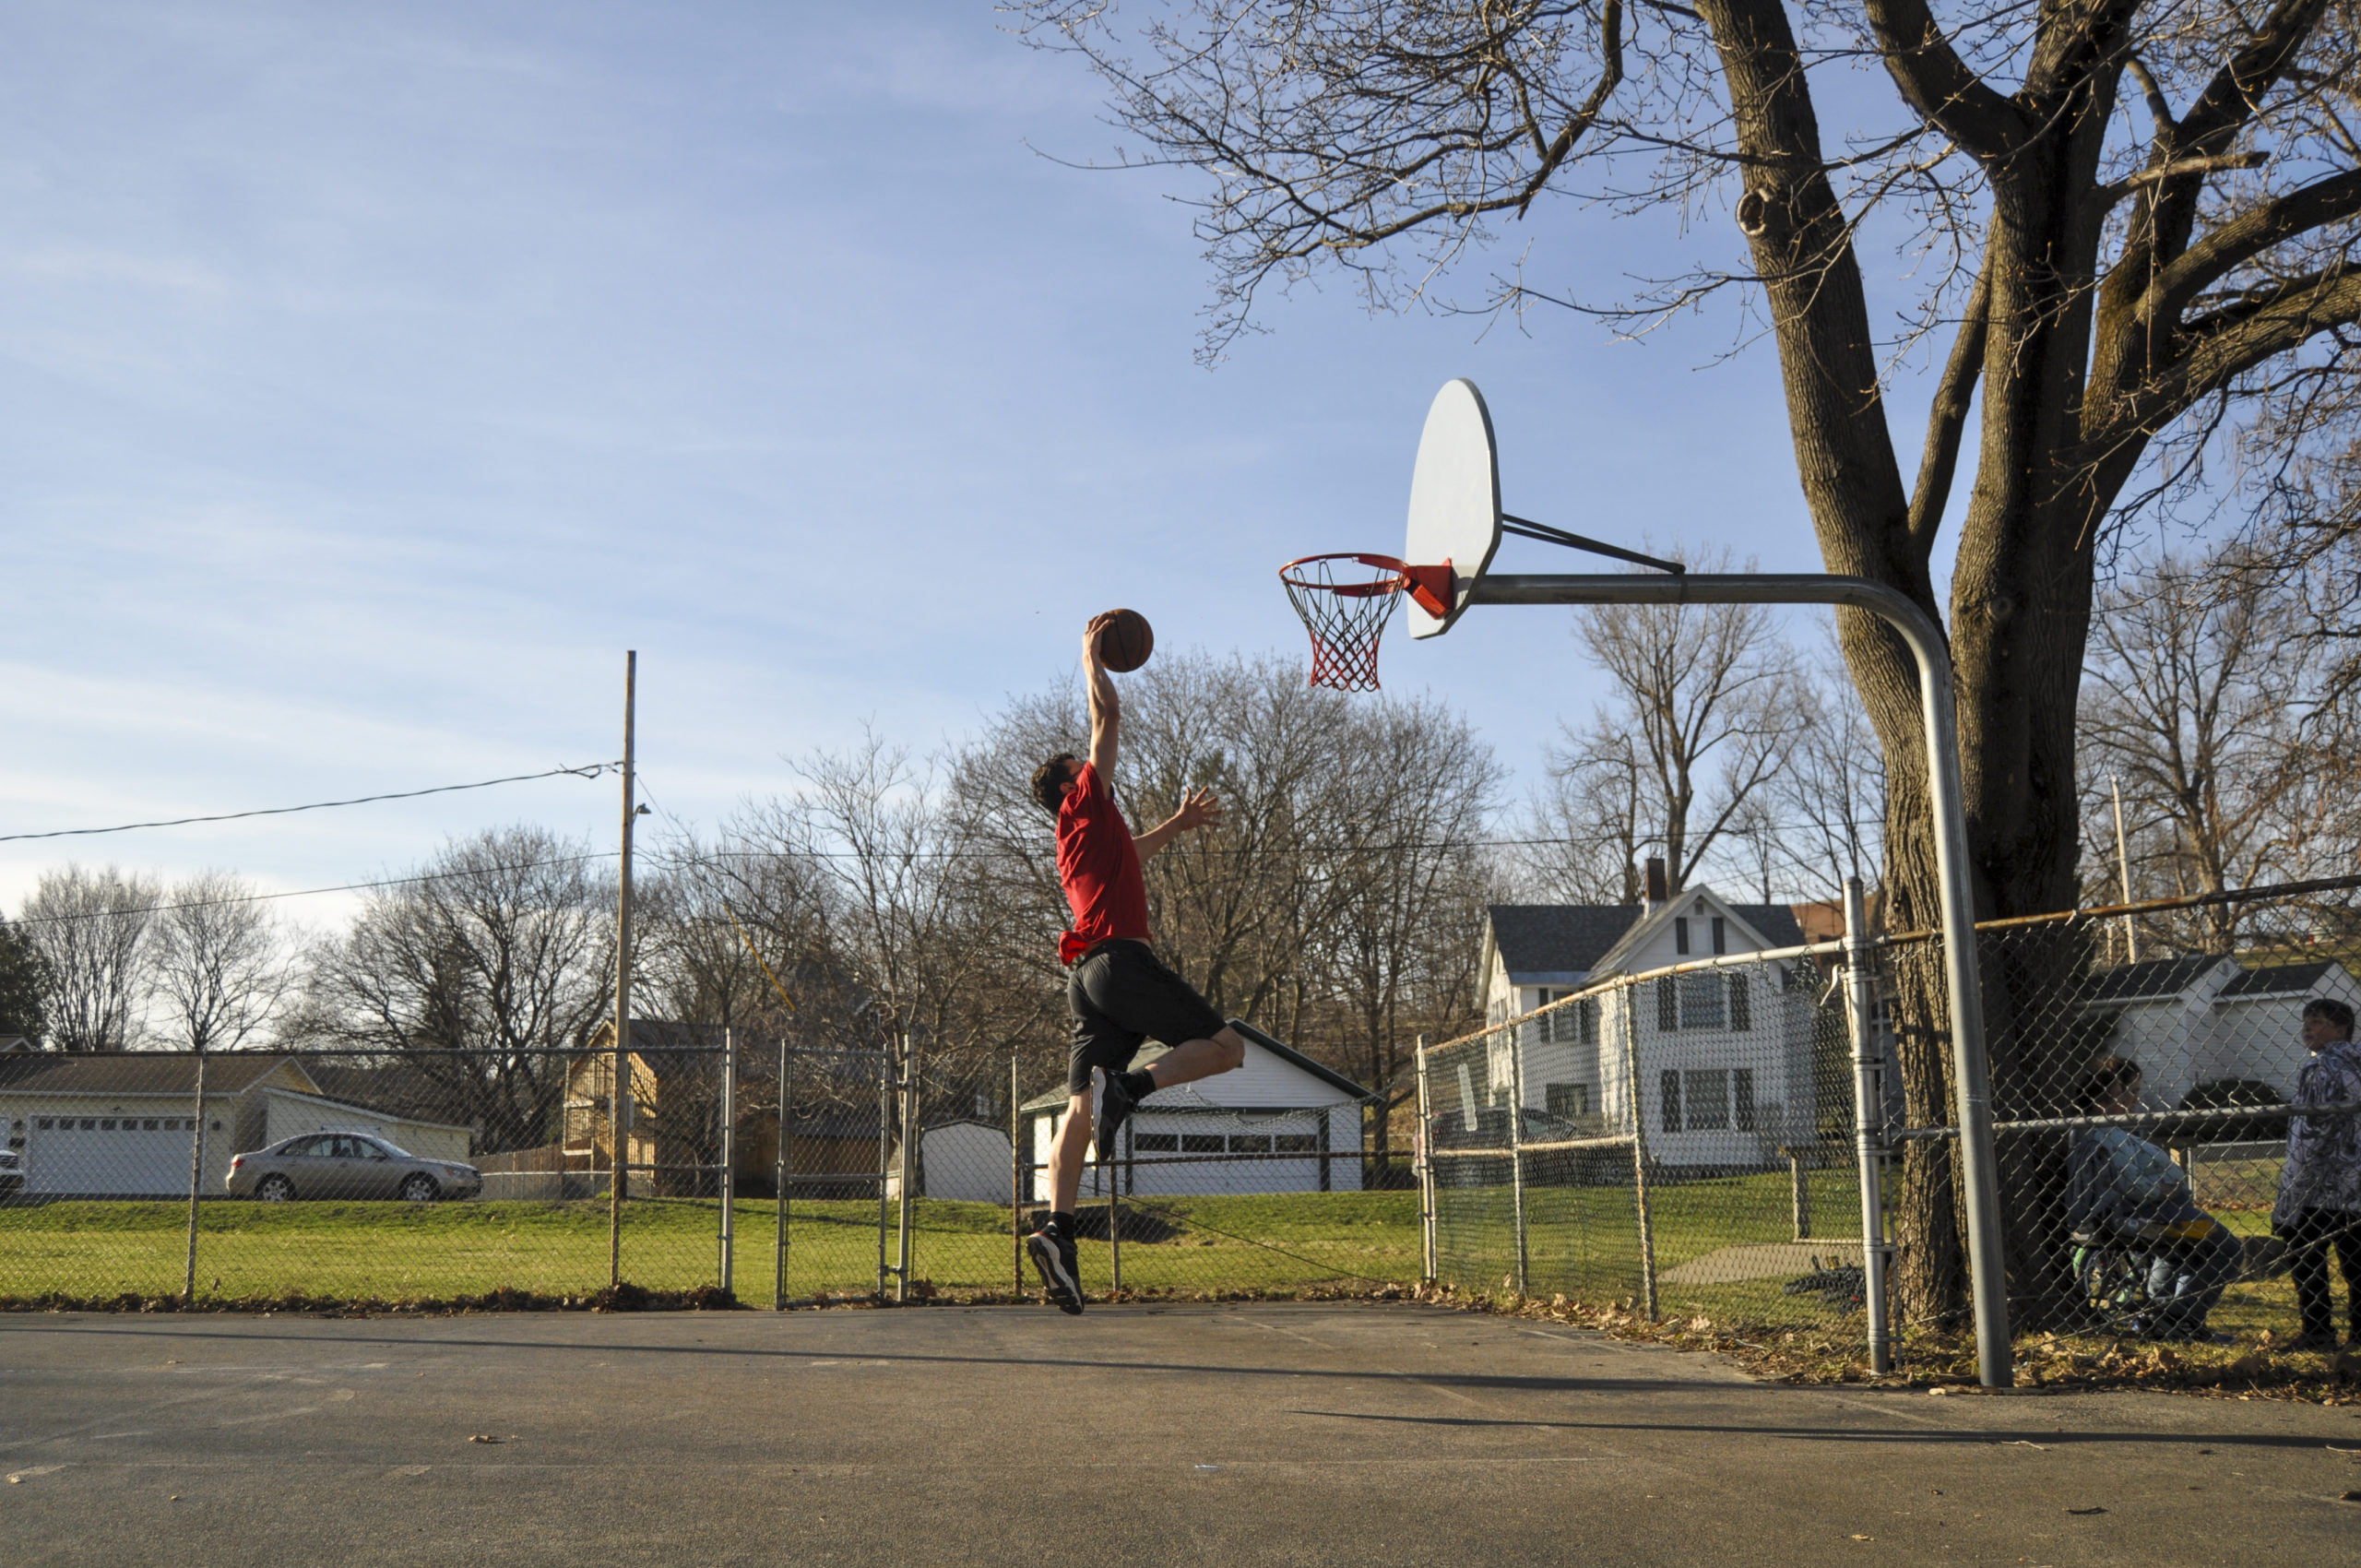 A ball is dunked at a park in St. Johnsville N.Y.